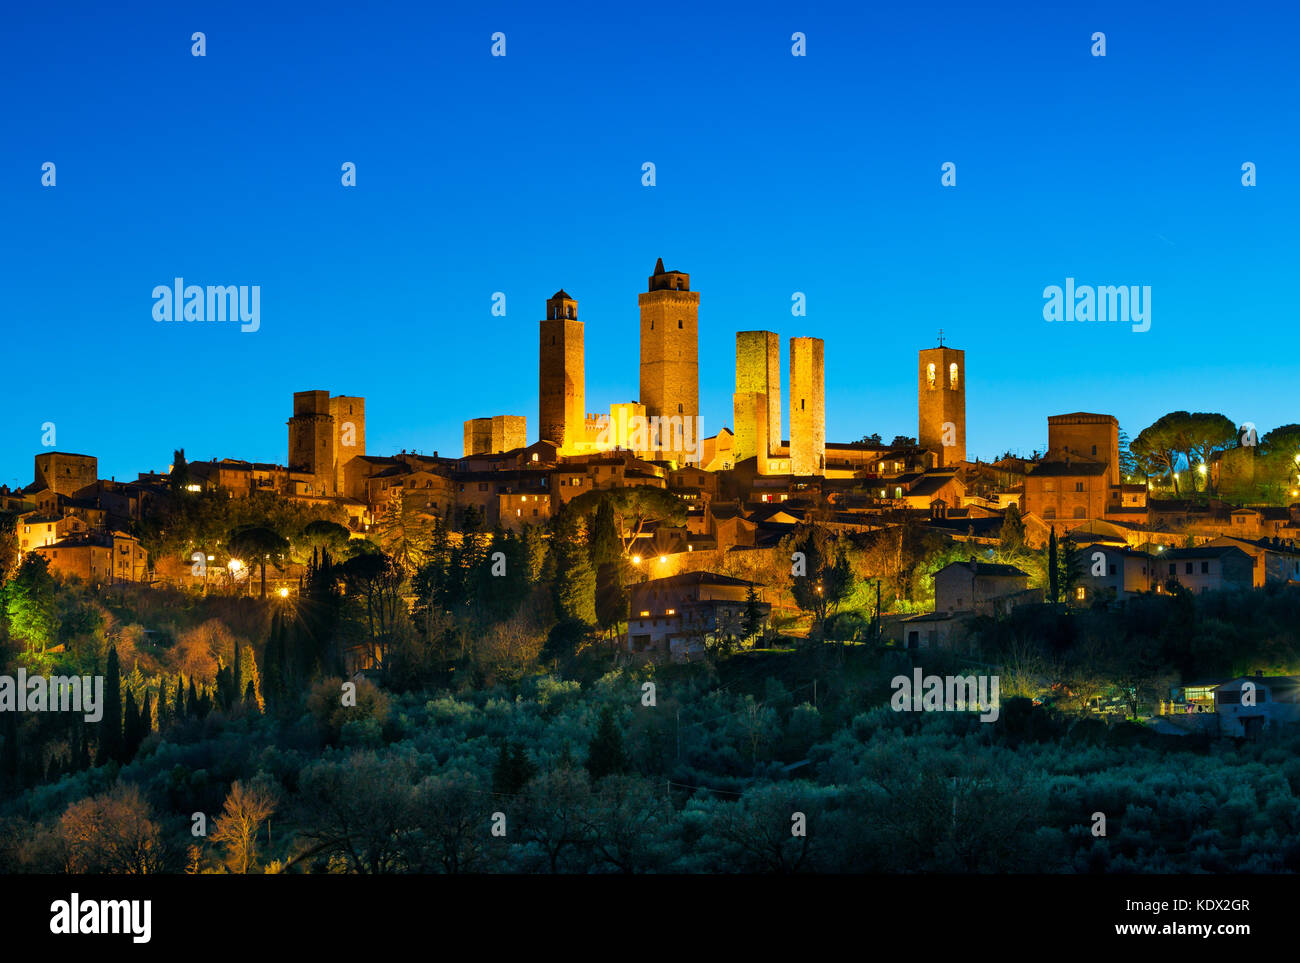 San Gimignano Town Skyline And Medieval Towers Sunset In Blue Hour Italian Olive Trees In